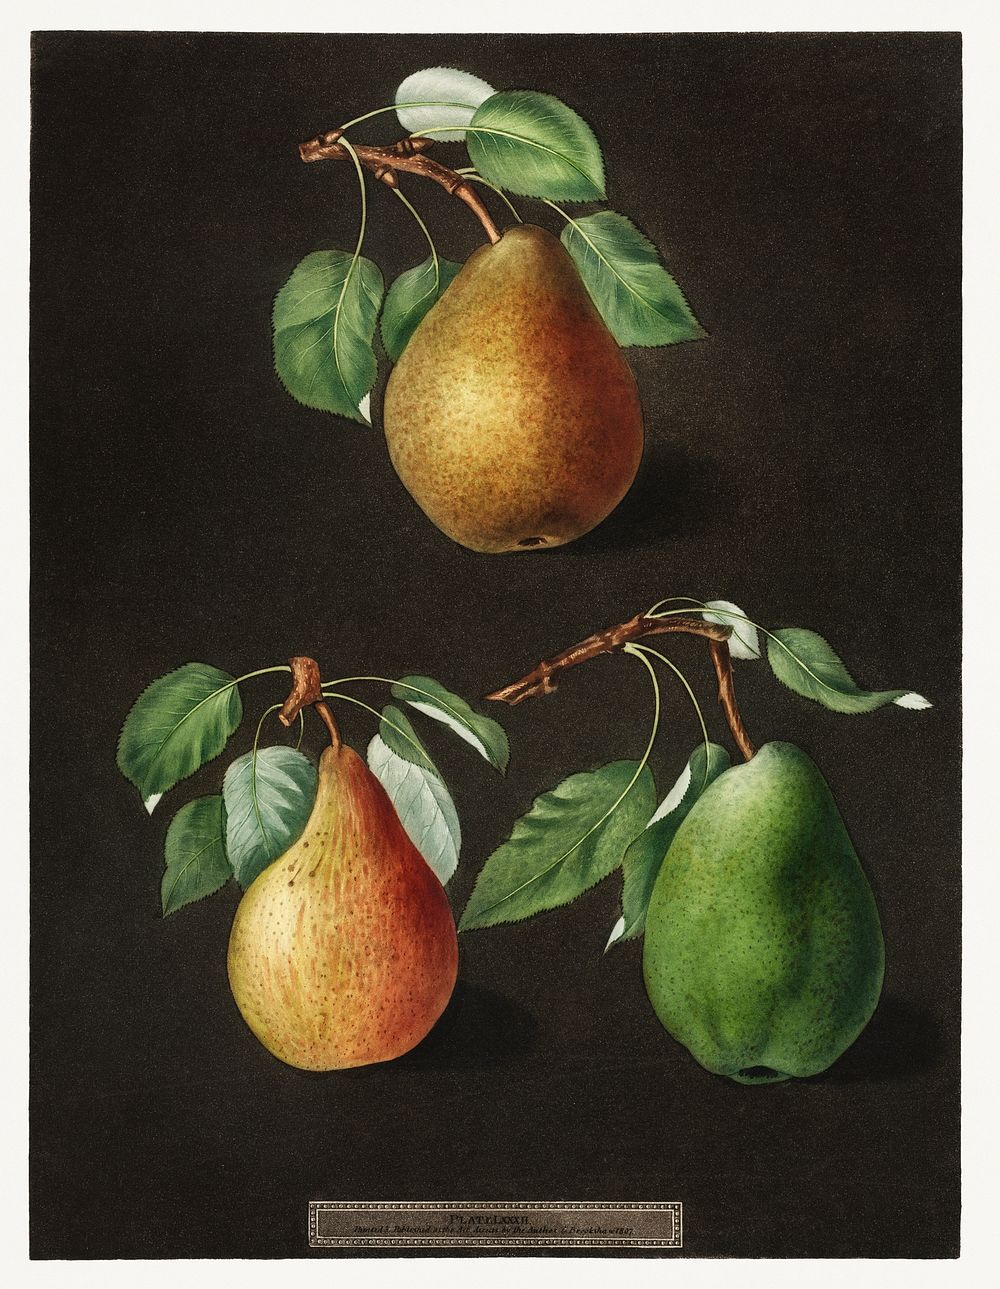 Pears (Pyrus) (1807) by George Brookshaw. Original from The Cleveland Museum of Art. Digitally enhanced by rawpixel.